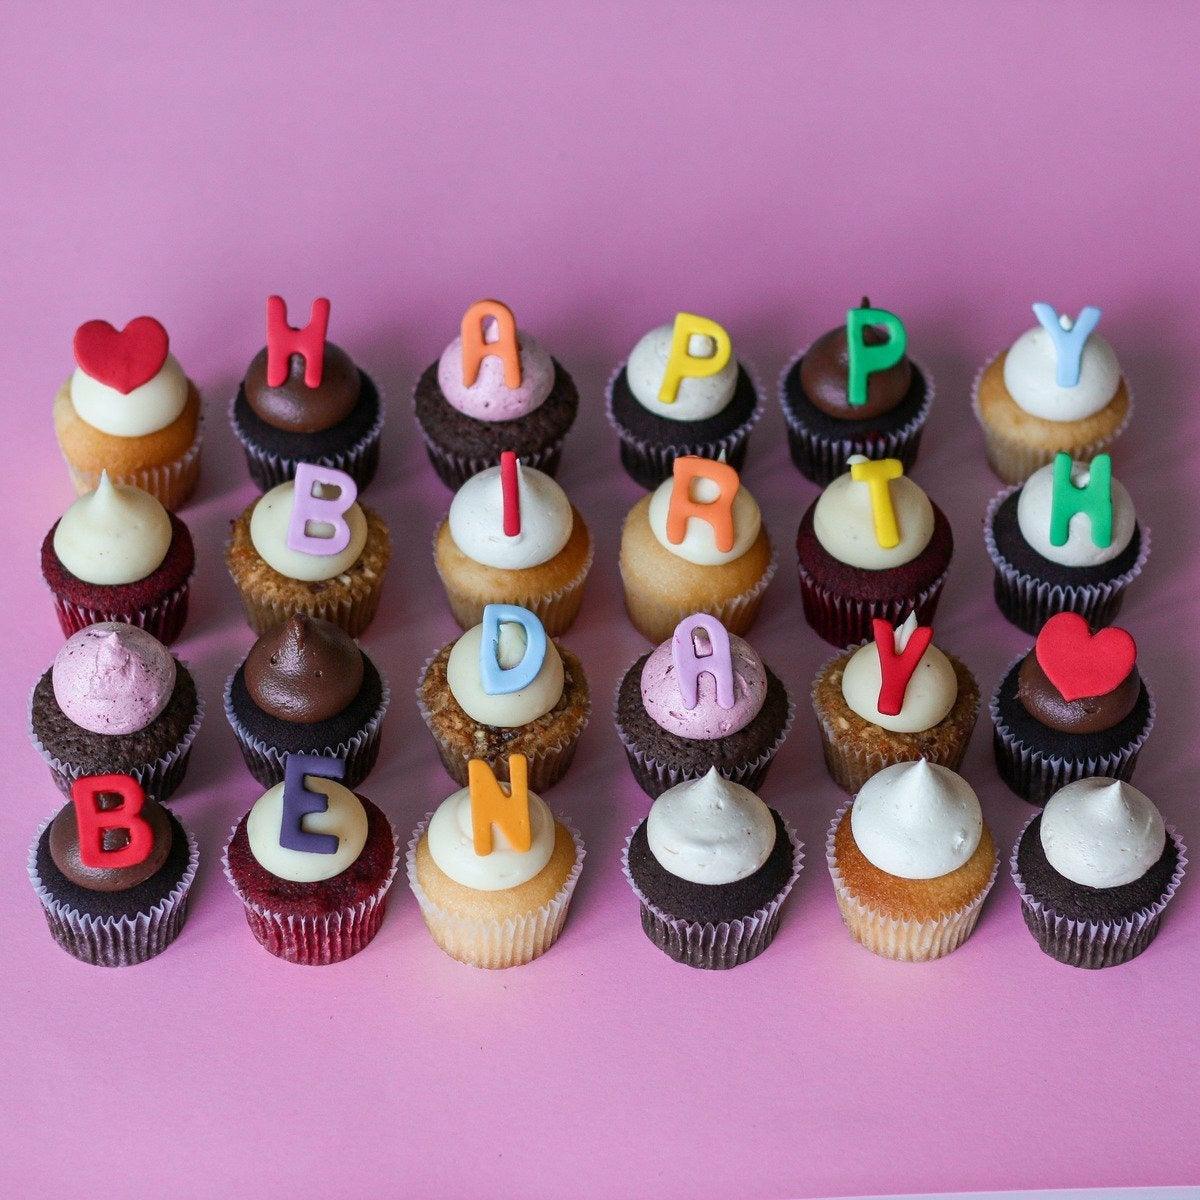 Happy Birthday Theme 3 Cupcakes by Little Cupcakes Melbourne